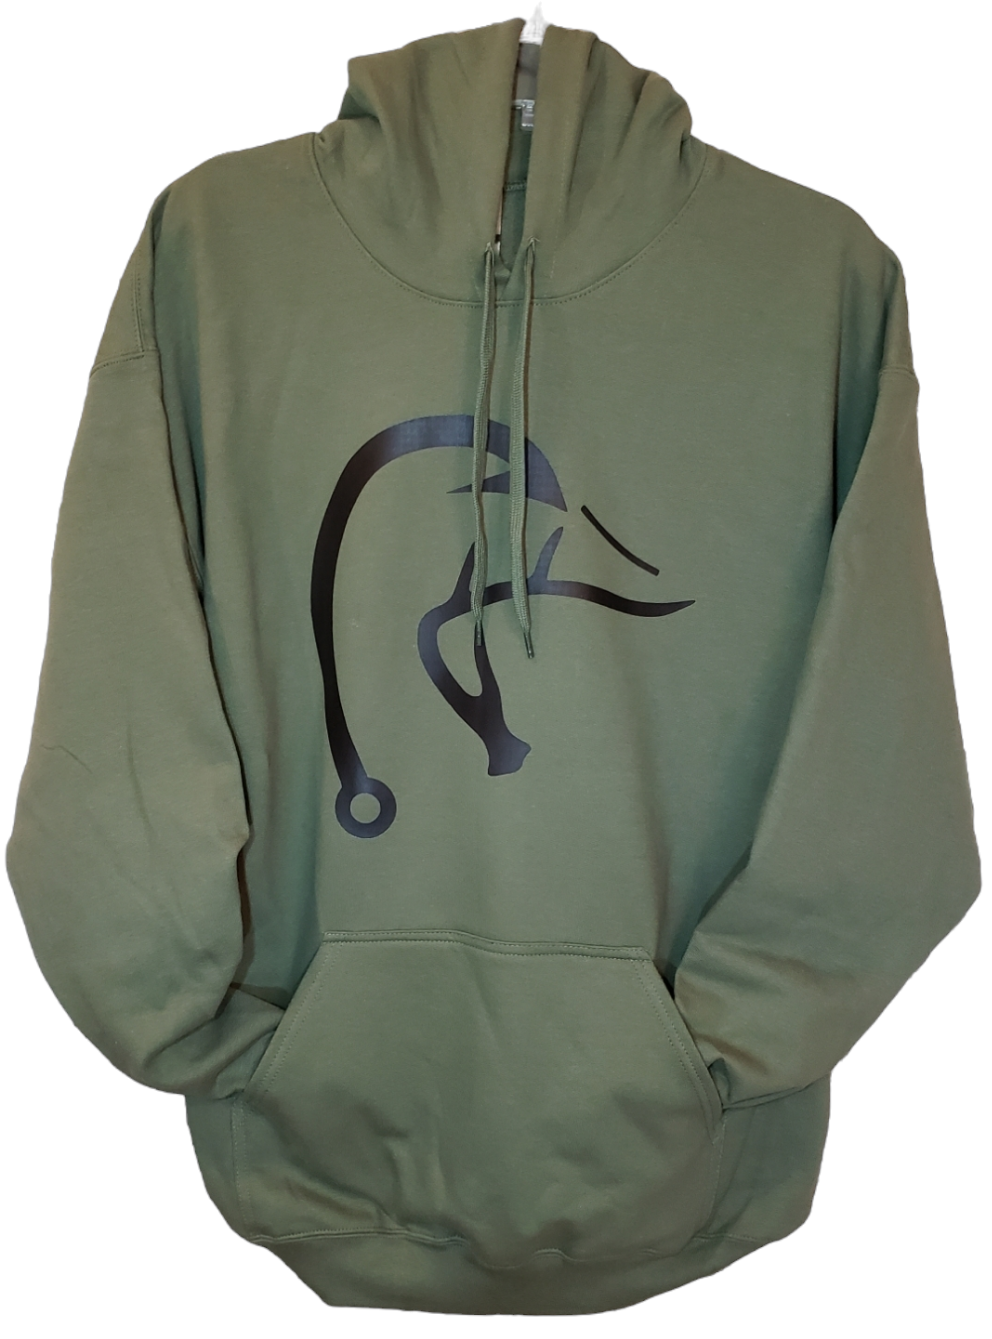 Hunting and Fishing Military Green Unisex Hoodie